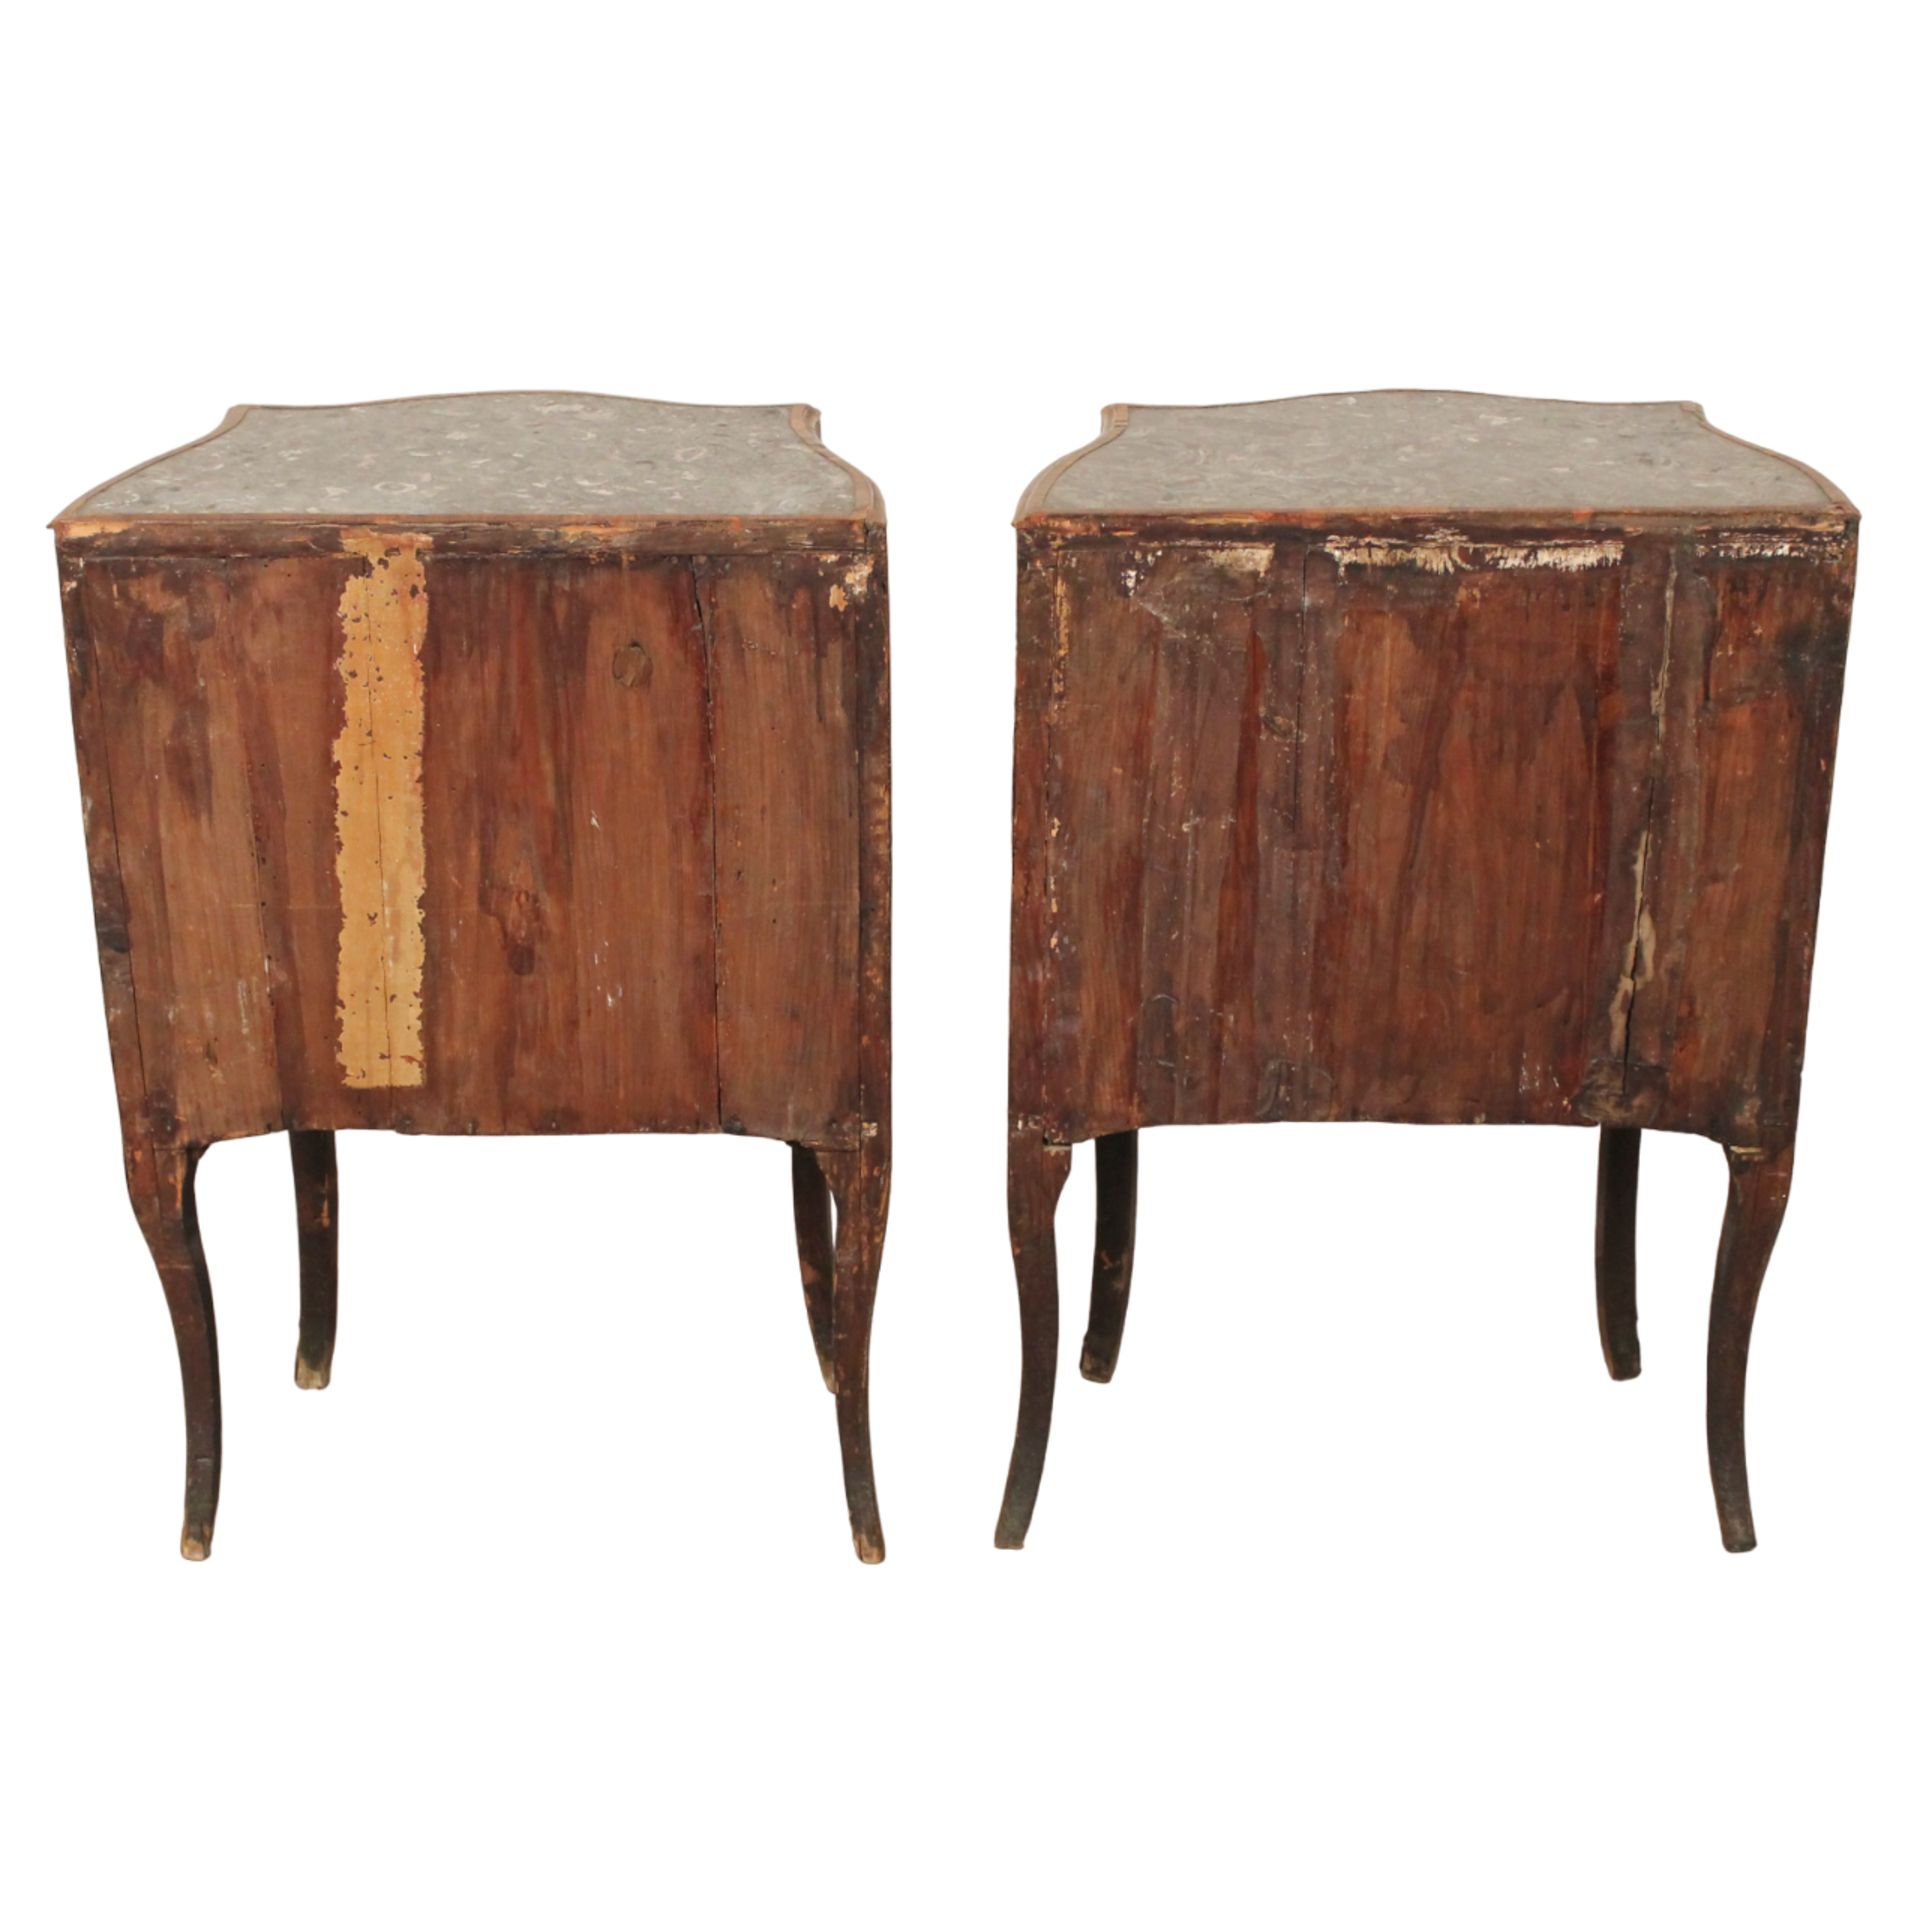 Coppia comodini - Pair of bedside tables - Image 3 of 3